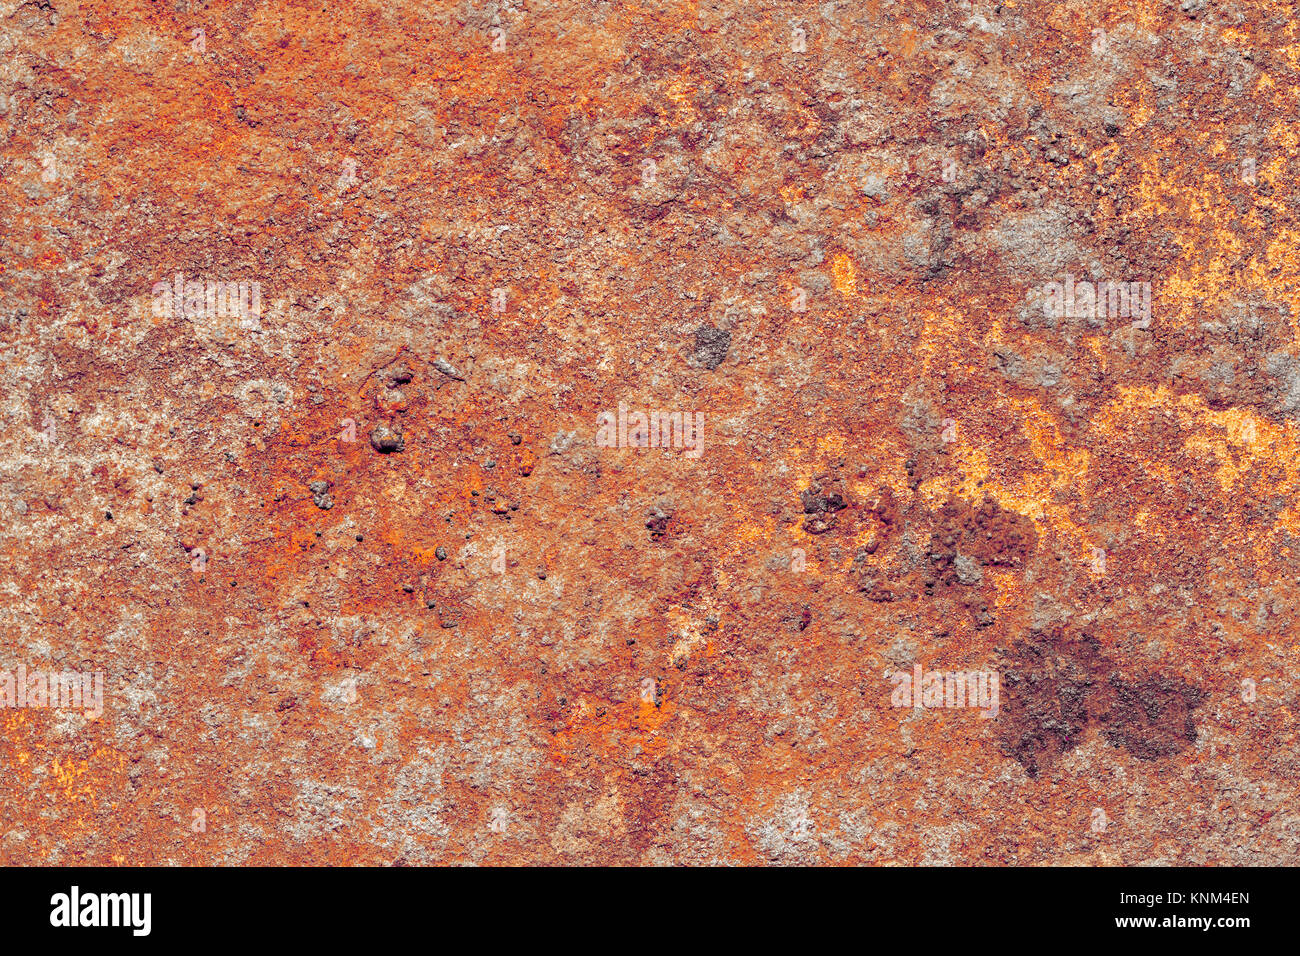 high detail corroded rusty surface with red and yellow fungus spots Stock Photo